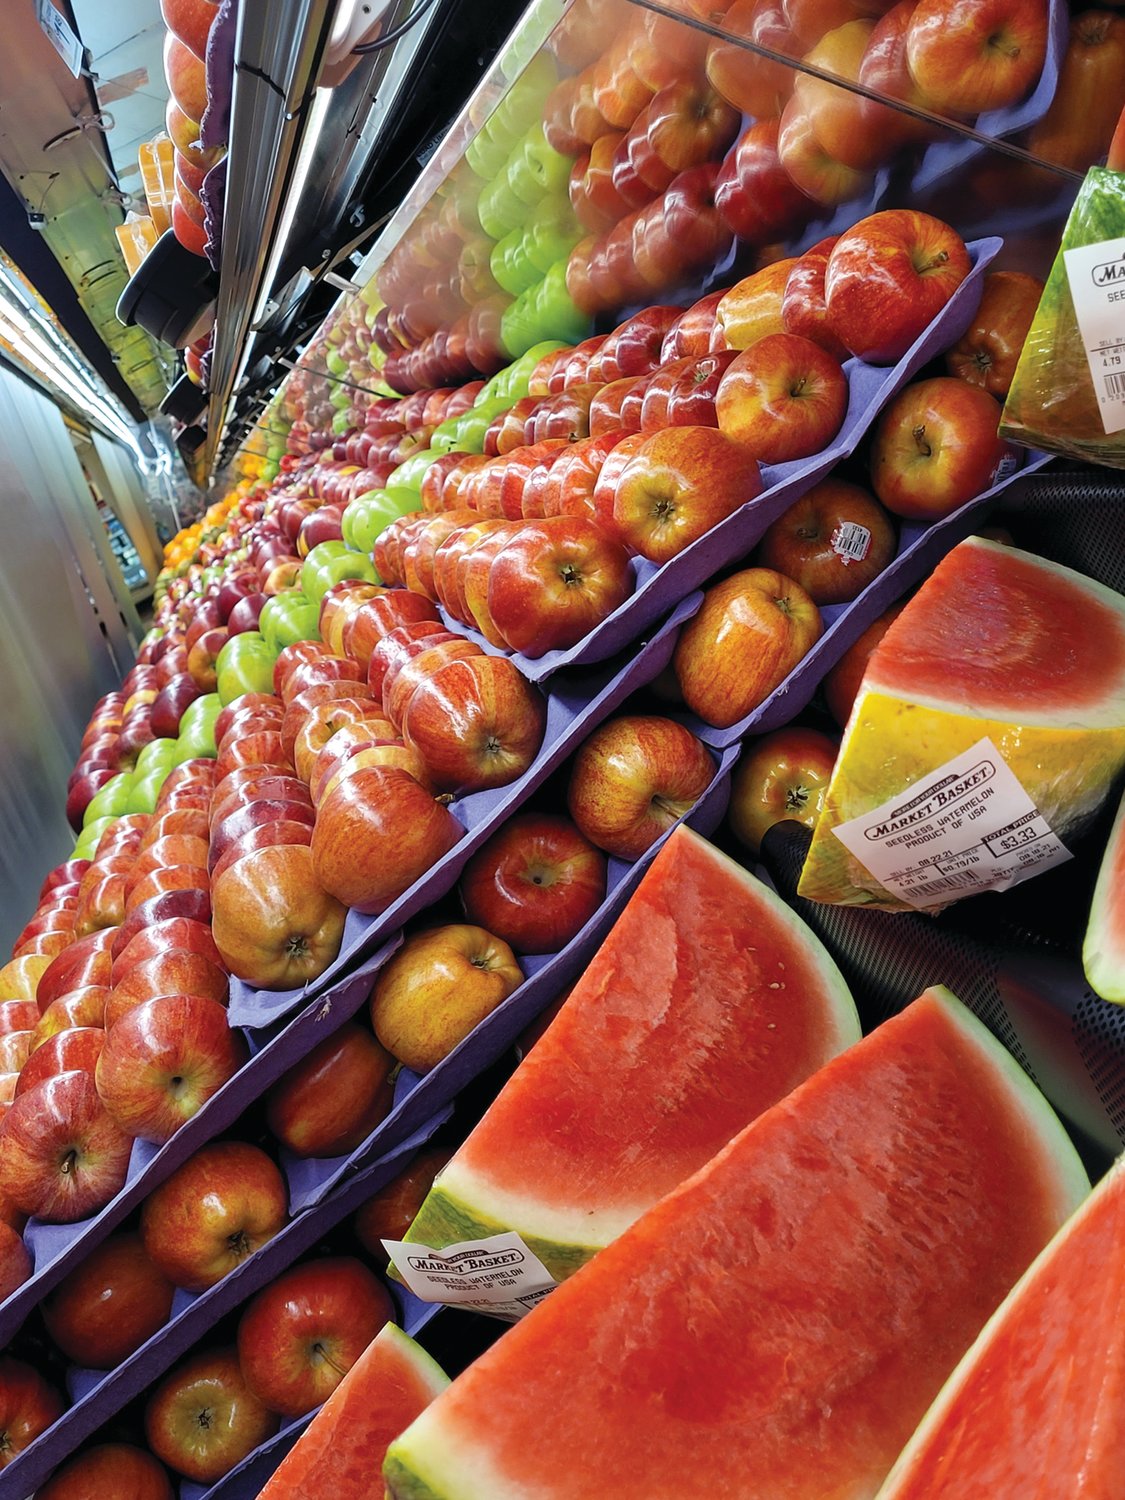 The produce section is bursting with fresh color, as Market Basket gets ready to open its Johnston store.